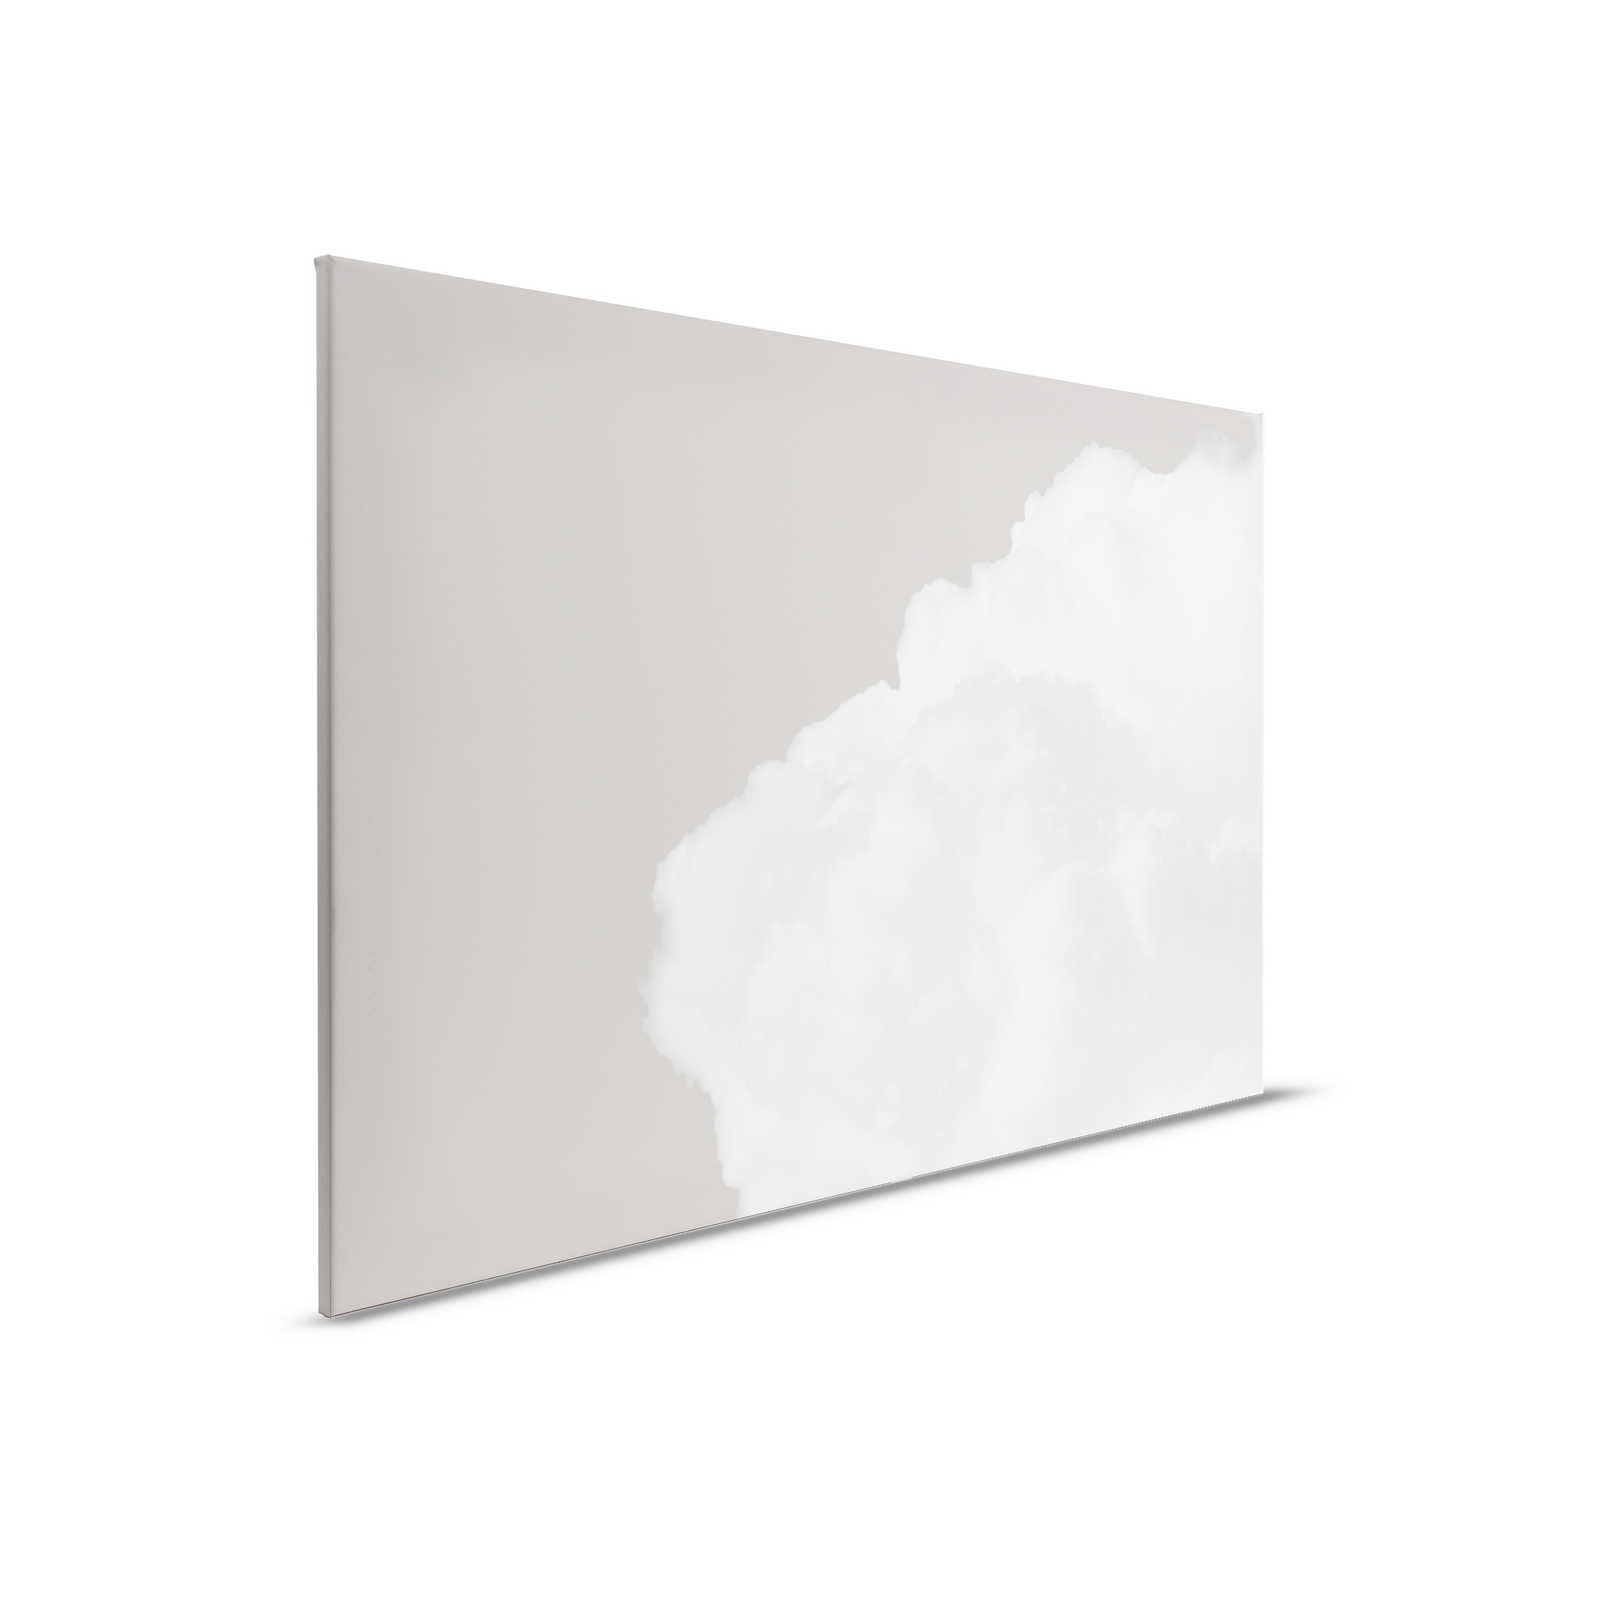         Canvas painting with white clouds in grey sky - 0,90 m x 0,60 m
    